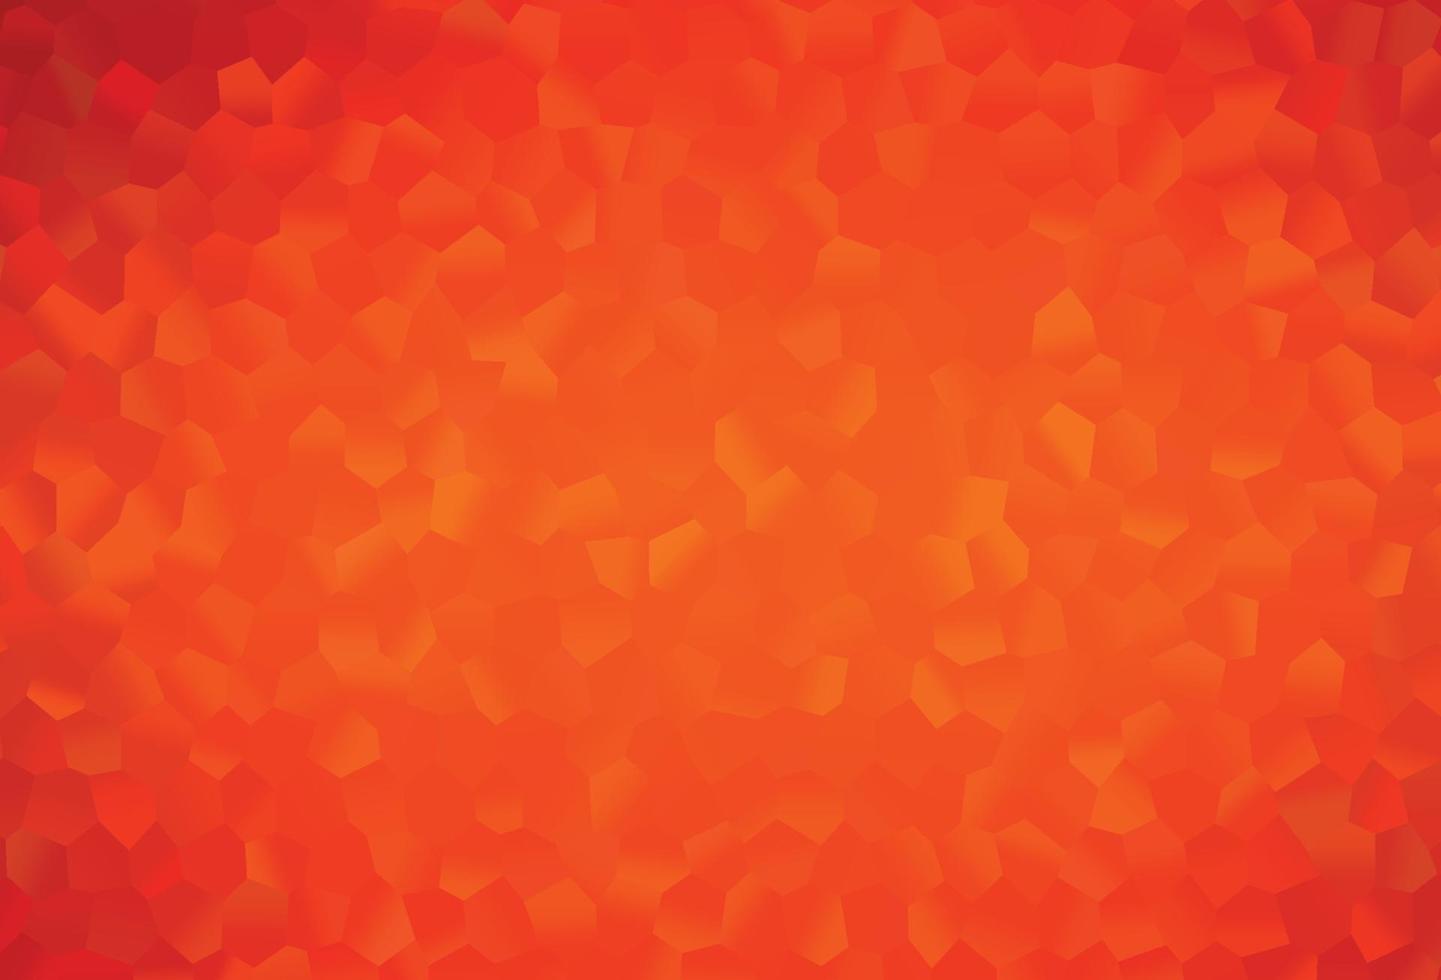 Light Orange vector cover with set of hexagons.